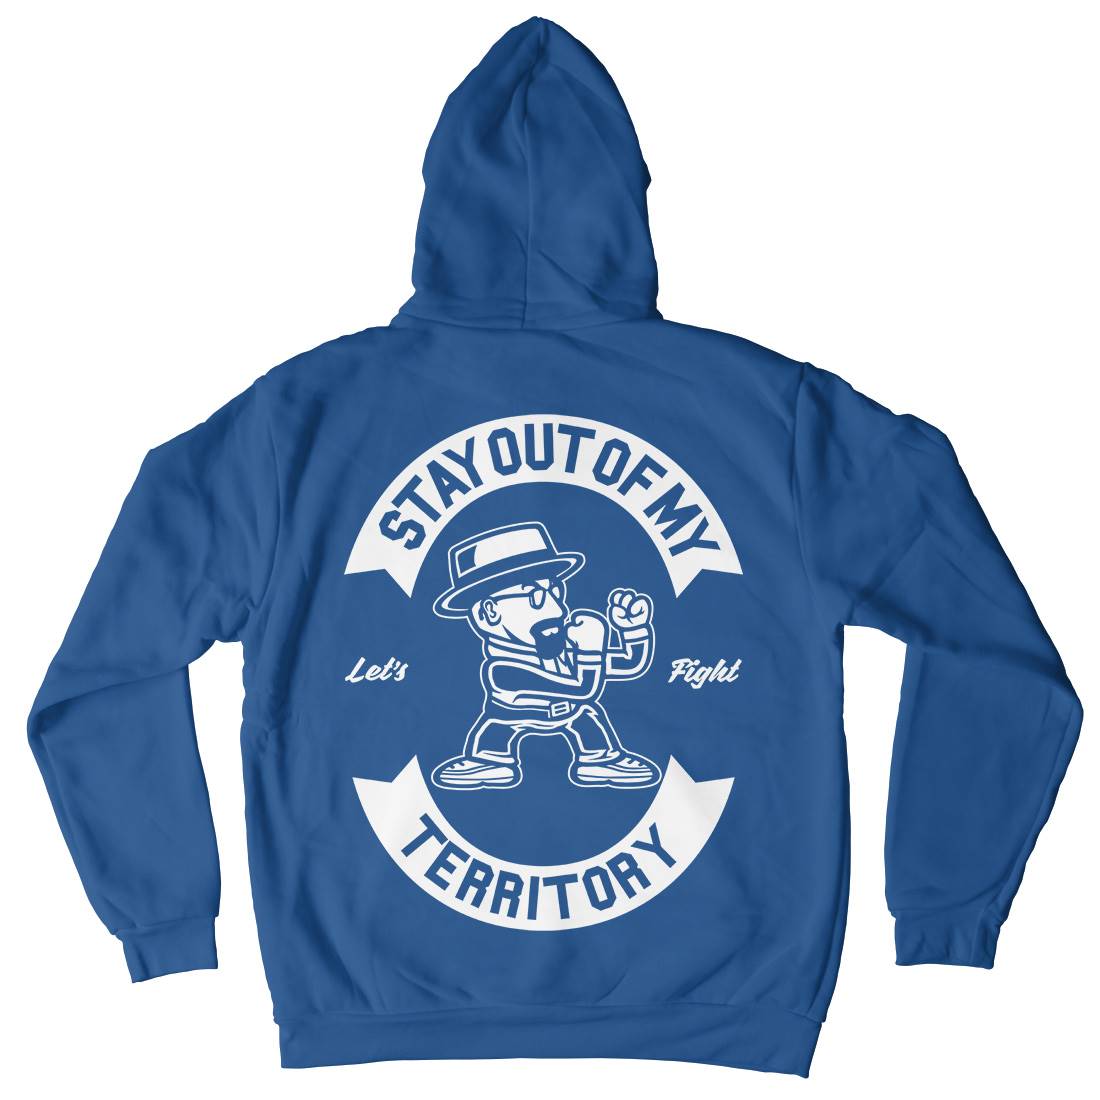 Stay Out Kids Crew Neck Hoodie Retro A284